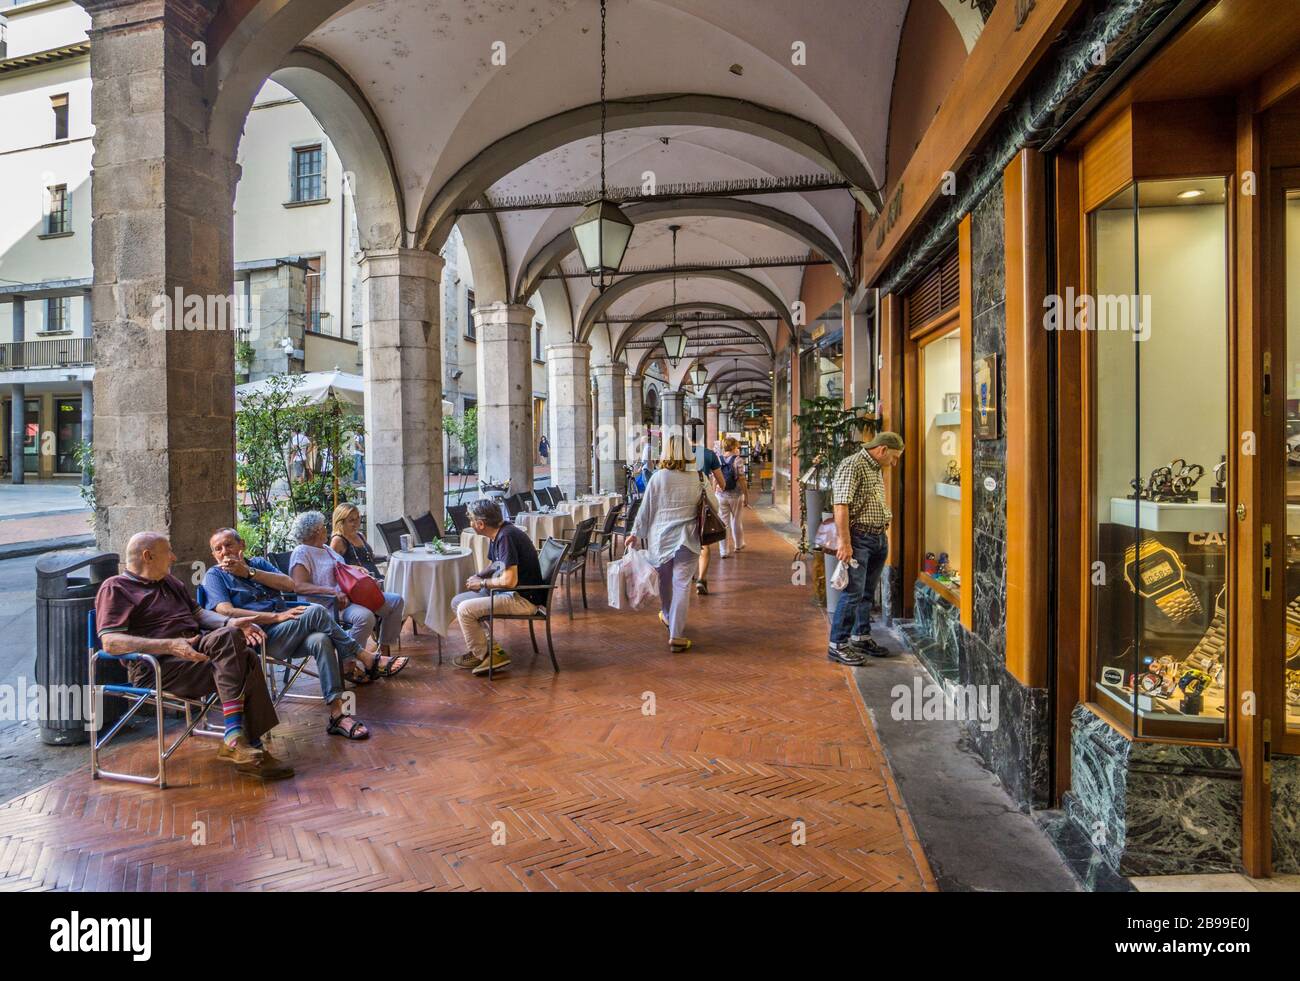 lined with cafes and shops, the arcaded Borgo Stretto a popular alleyway in the old parts of Pisa, Tuscany, Italy Stock Photo